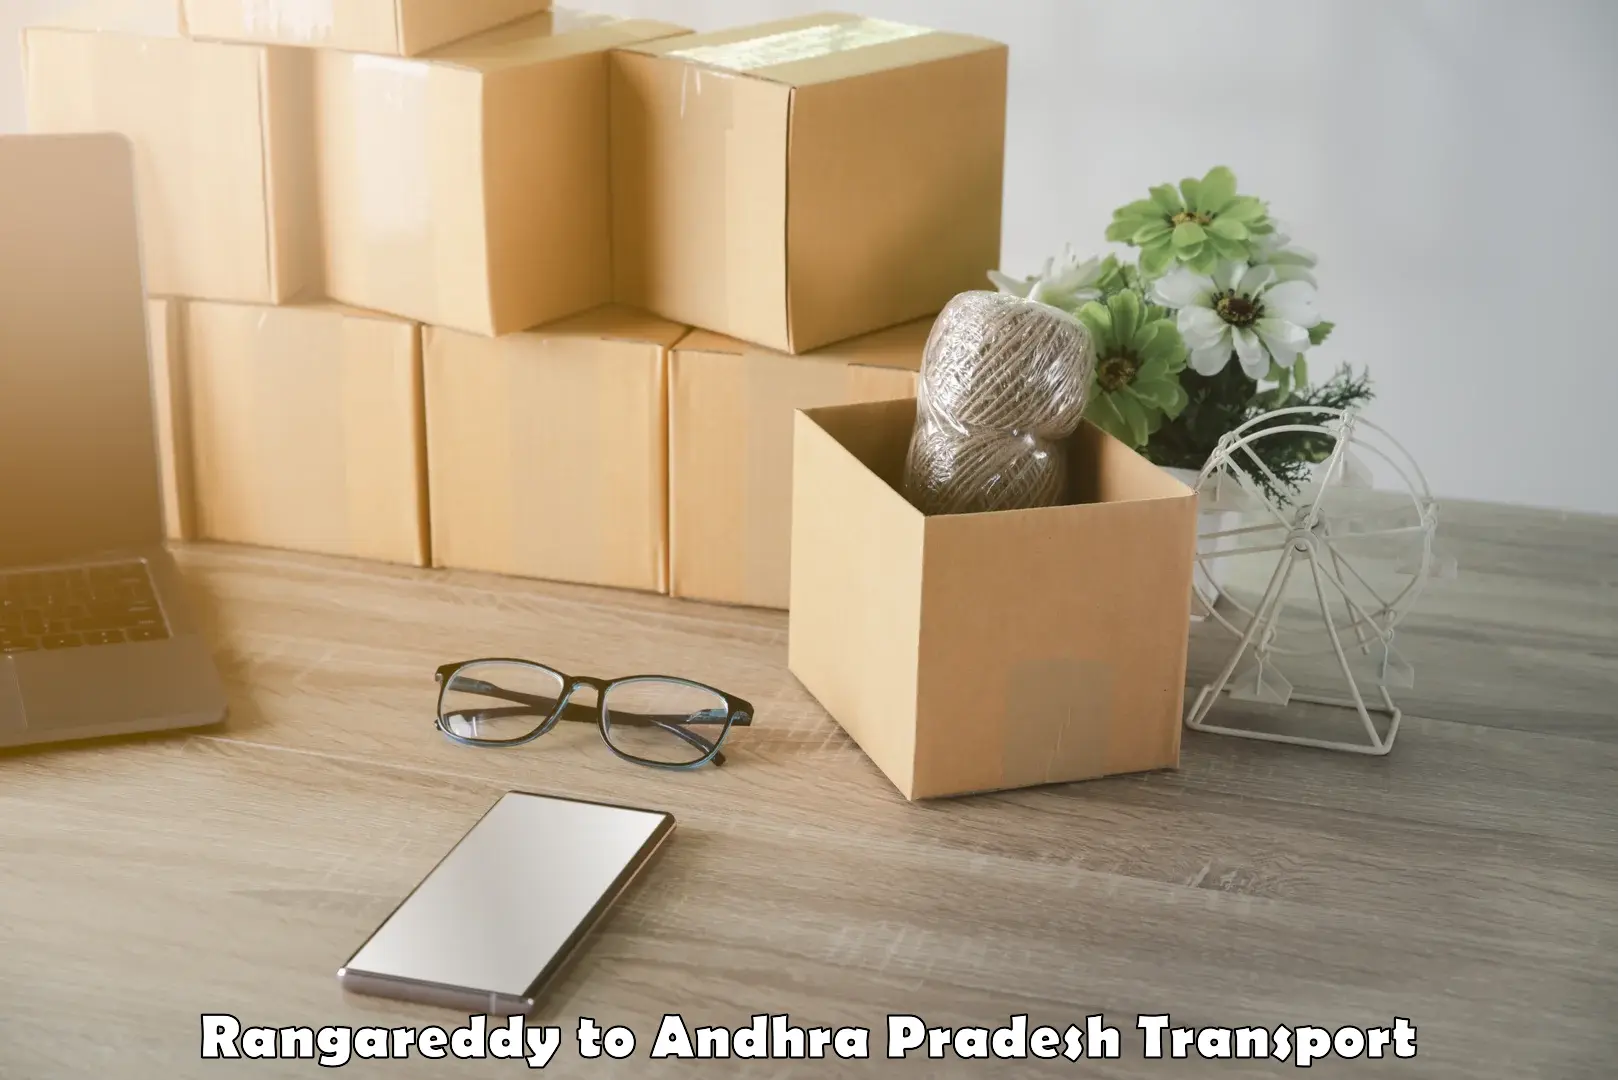 Parcel transport services Rangareddy to Chimakurthy